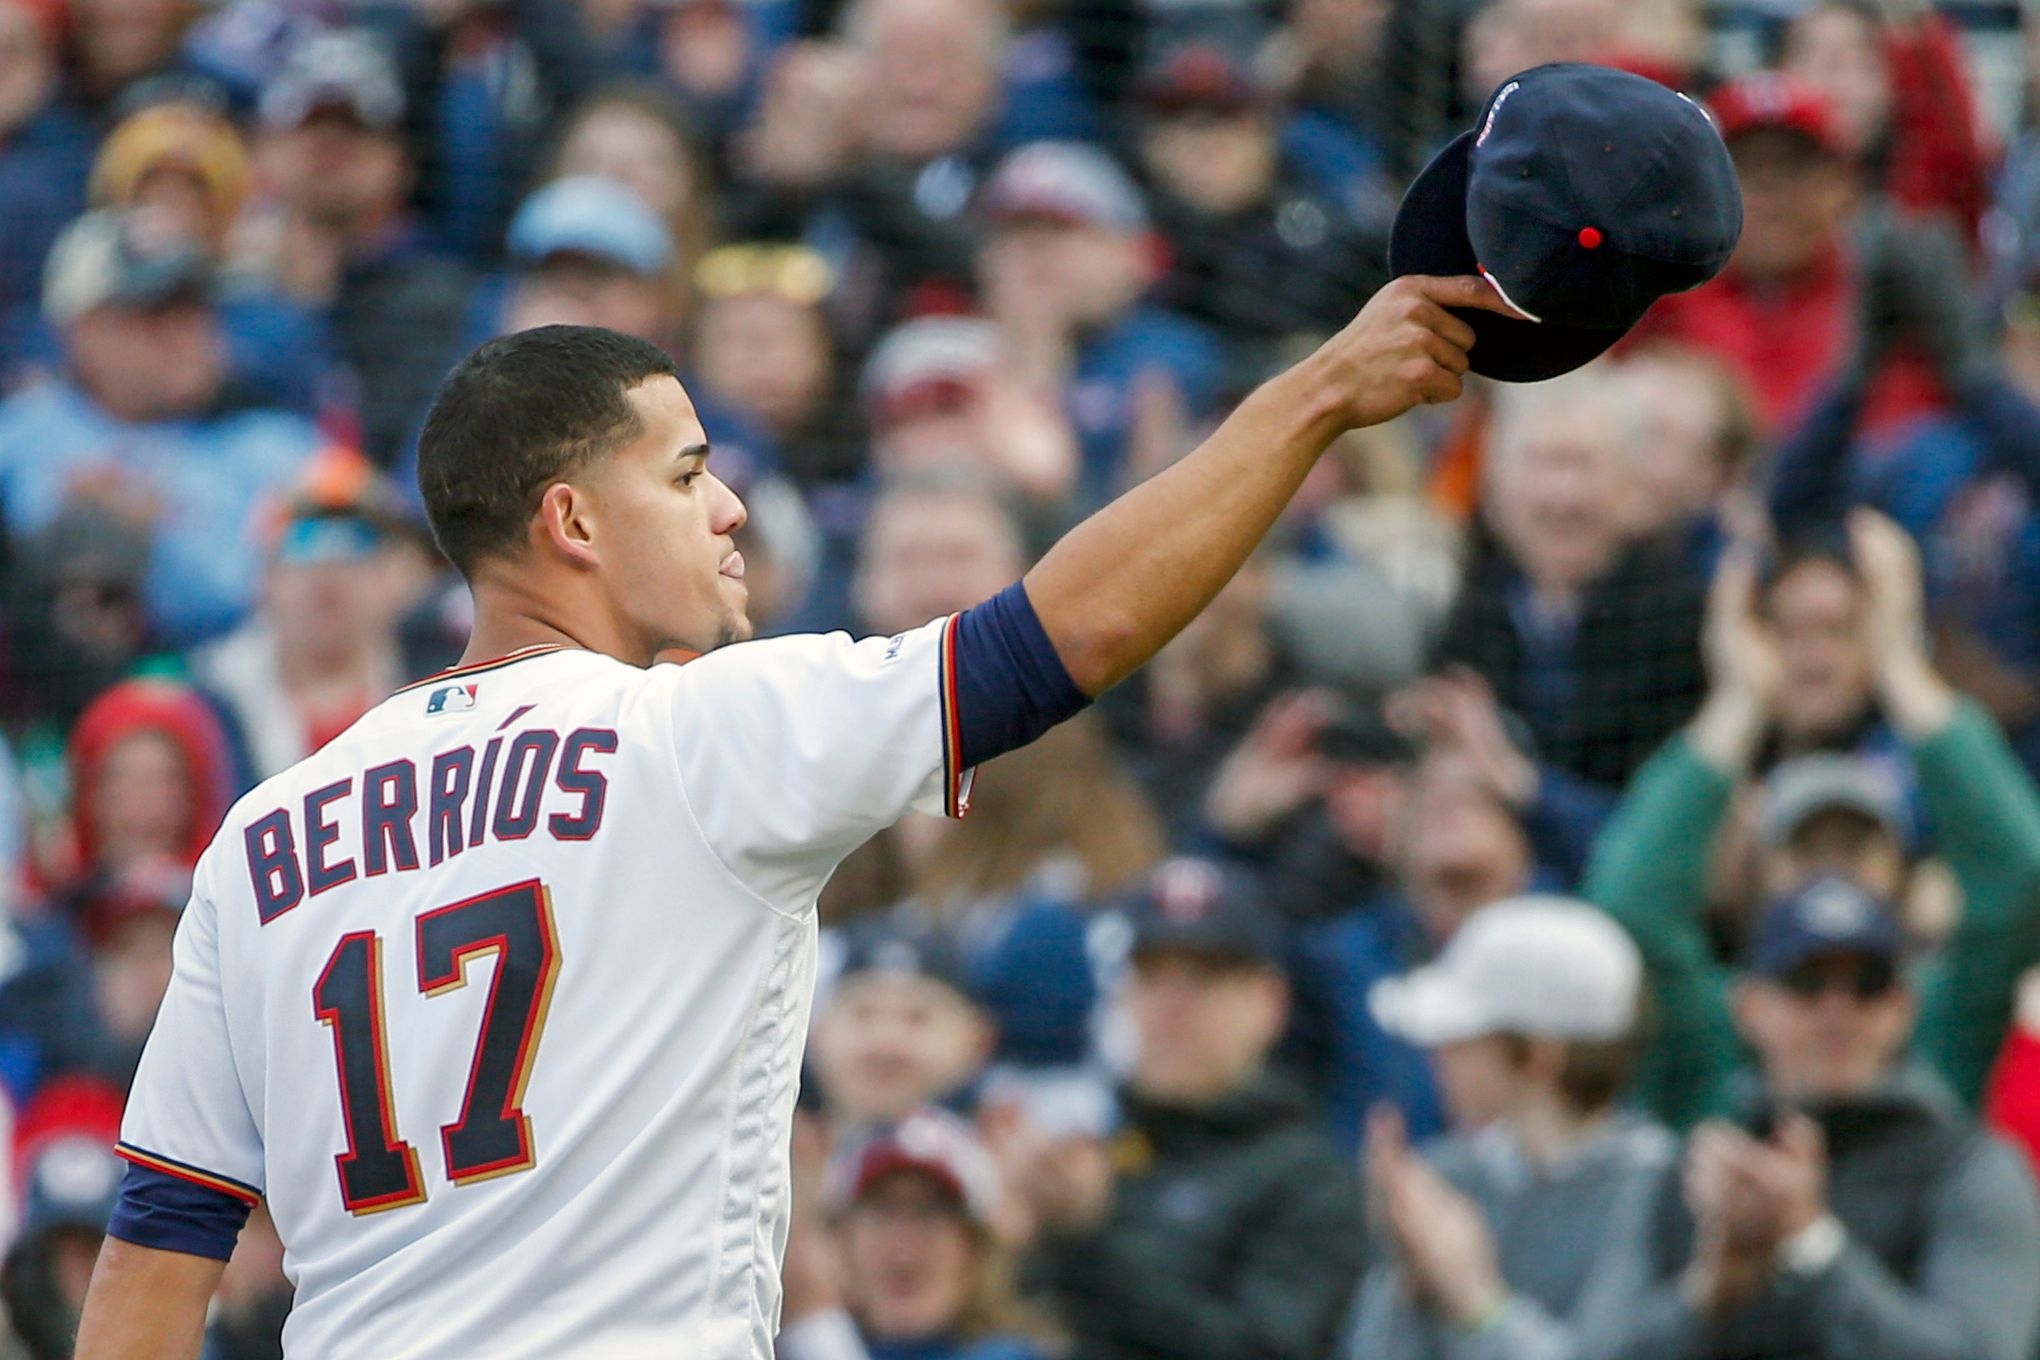 Twins' Jose Berrios has yet to walk a batter this spring